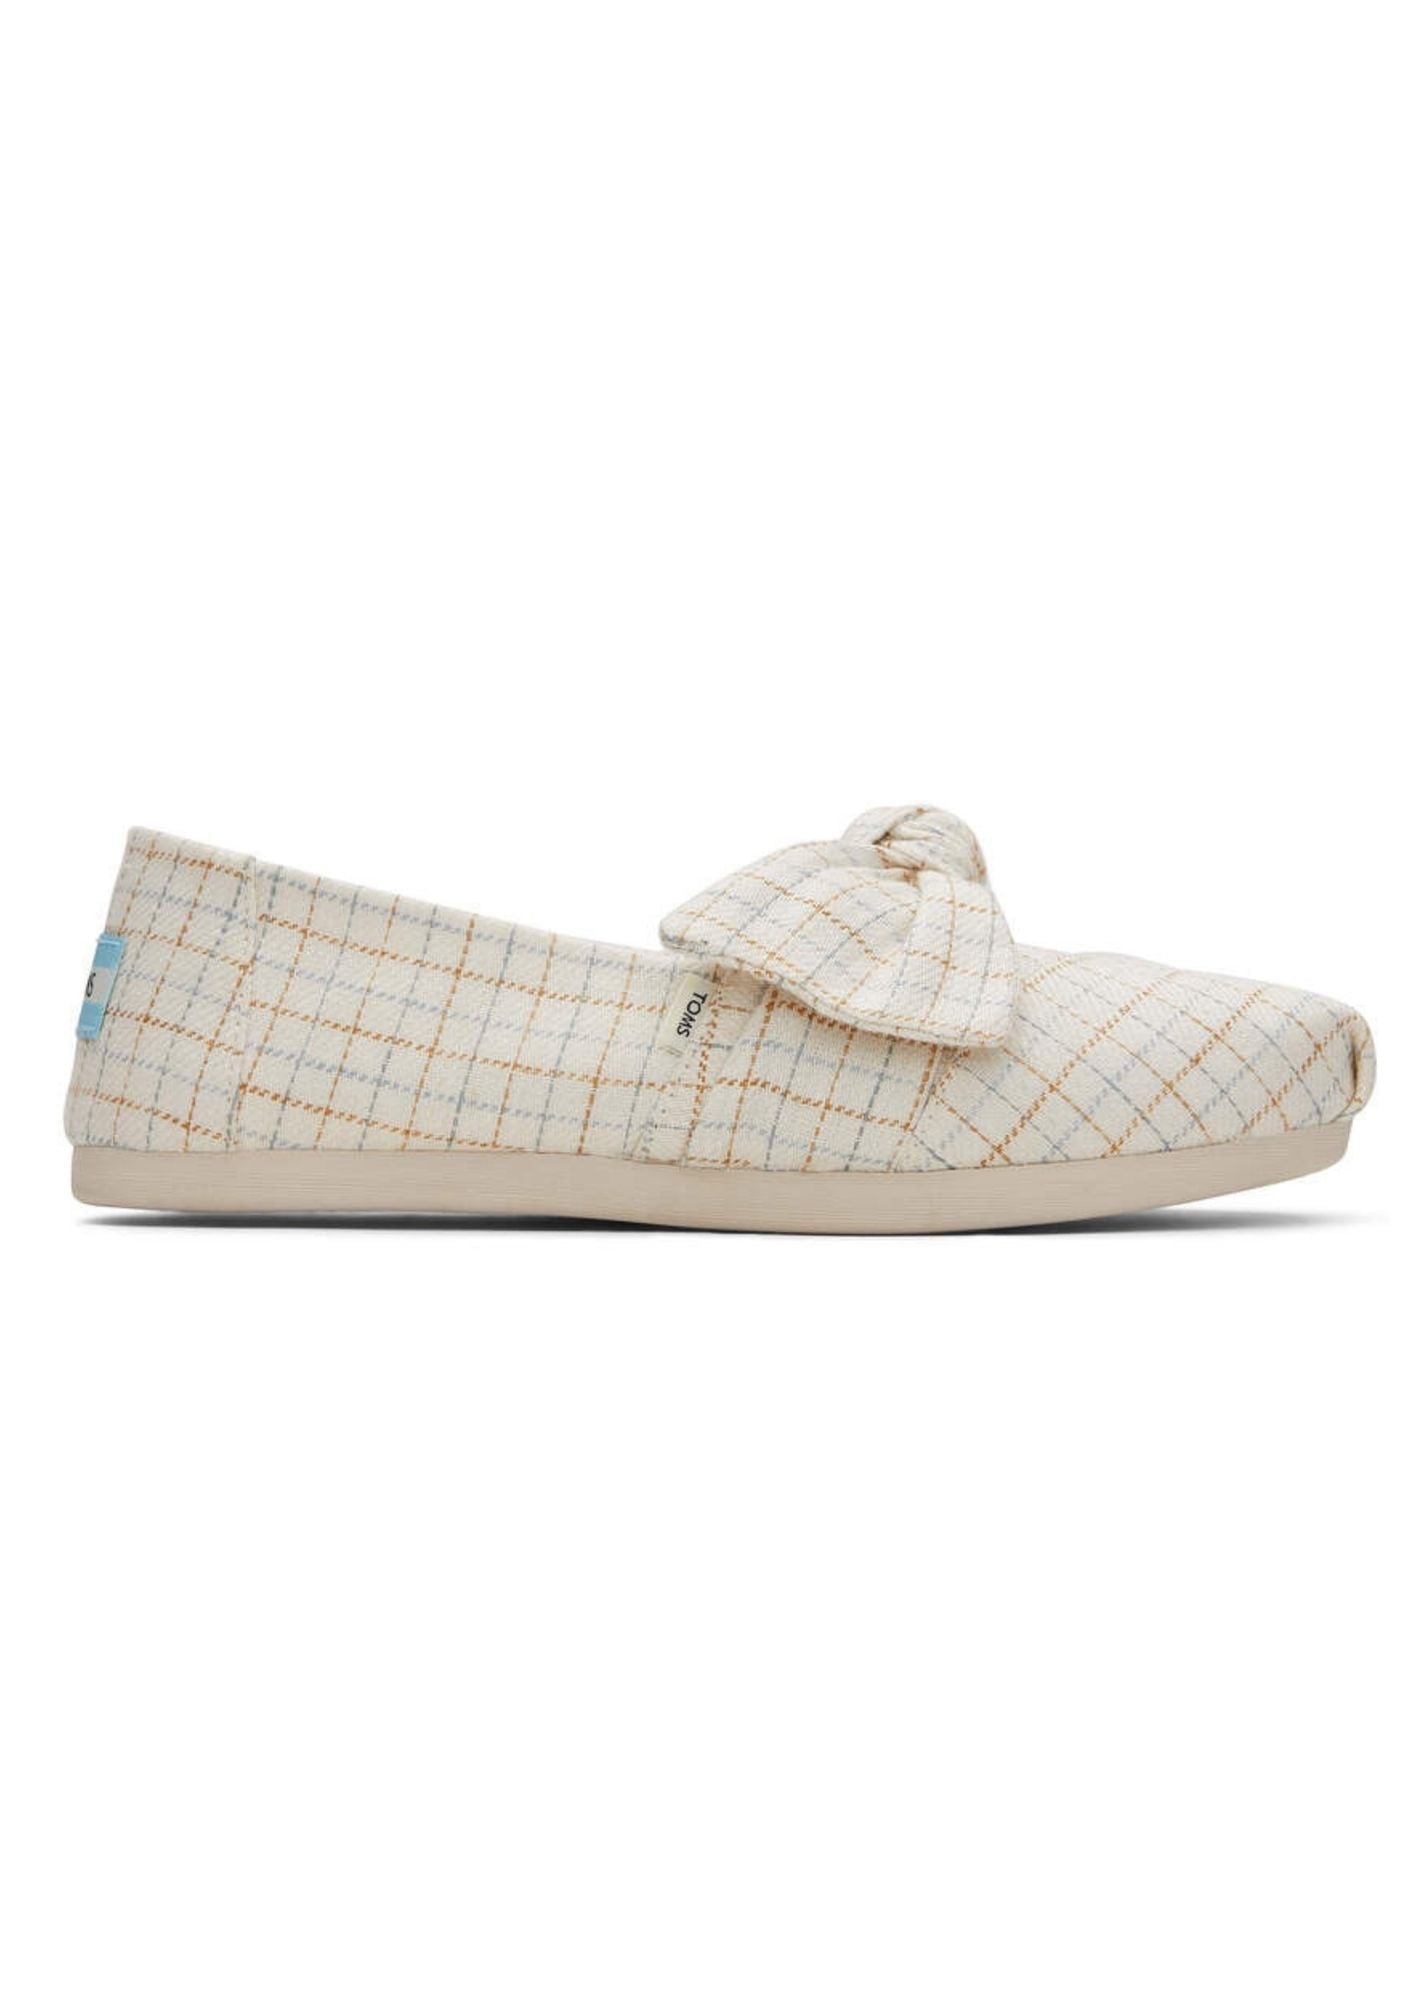 TOMS® Alpargata Checkered Bow Shoes TOMS